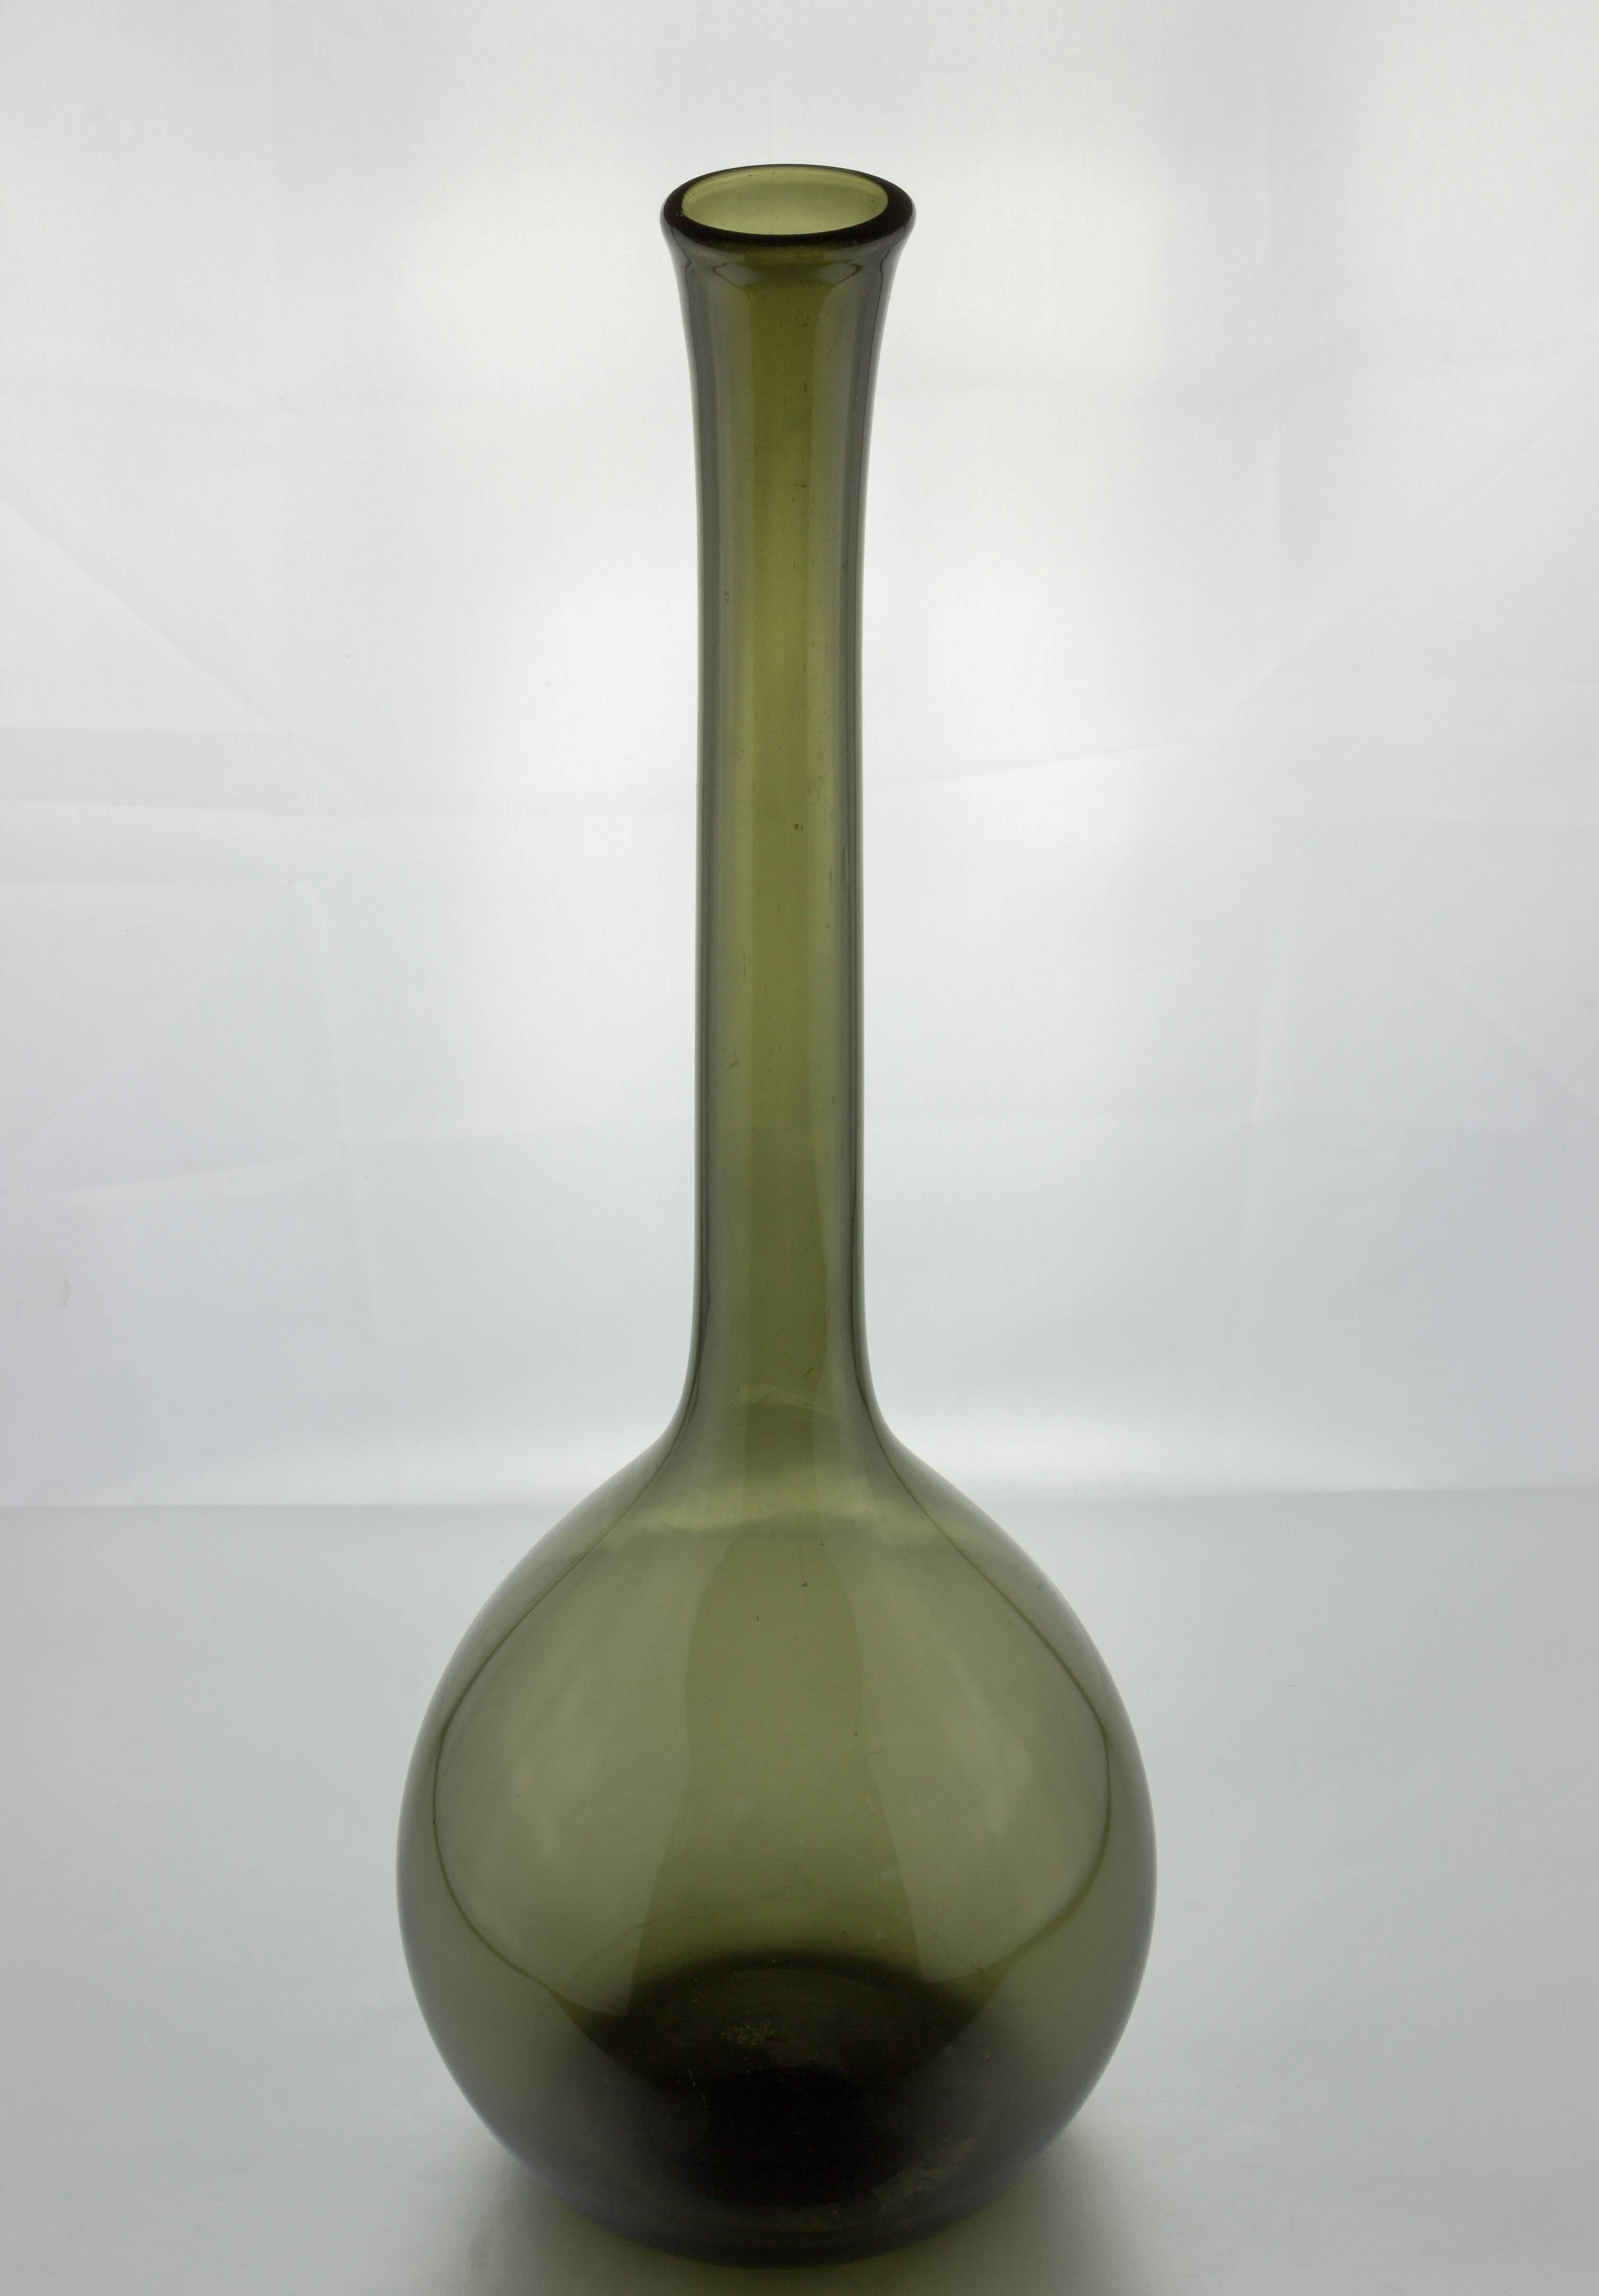 Tall Scandinavian glass vase, most likely by Arthur Percy, in a smoky green color. Great condition.